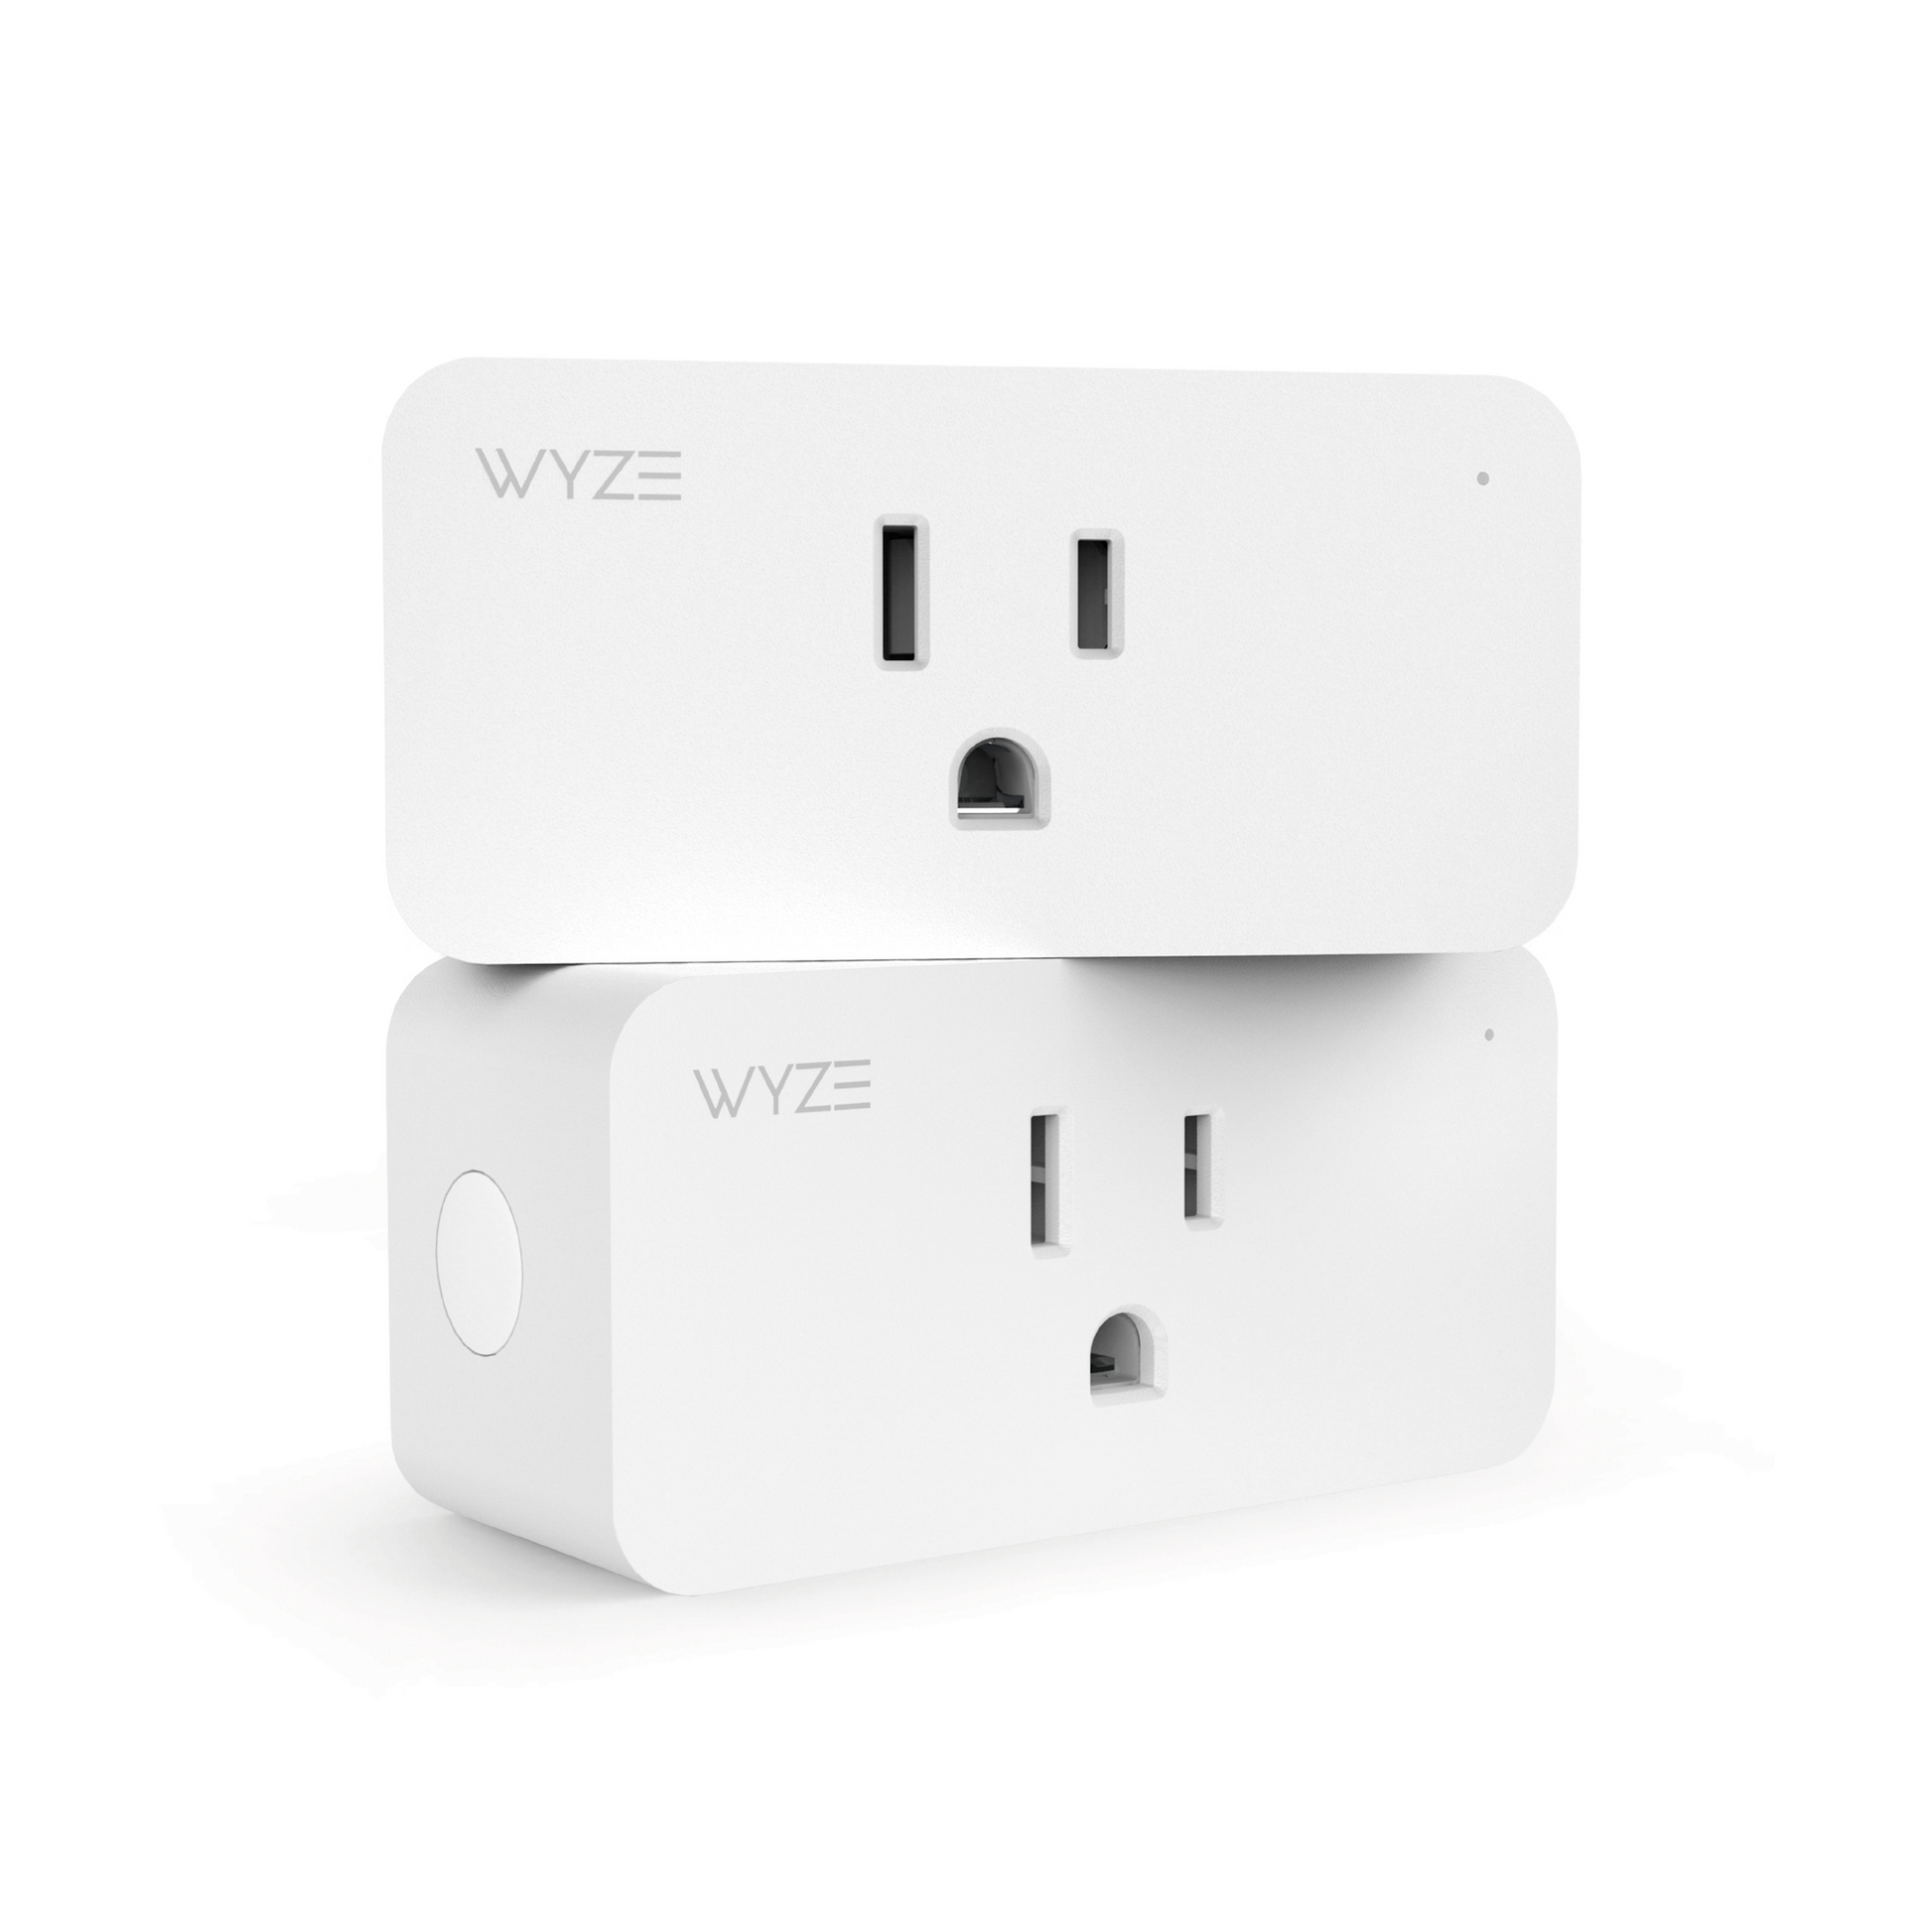 Smart WiFi Outdoor Plug, Smart Outlet Compatible with Alexa